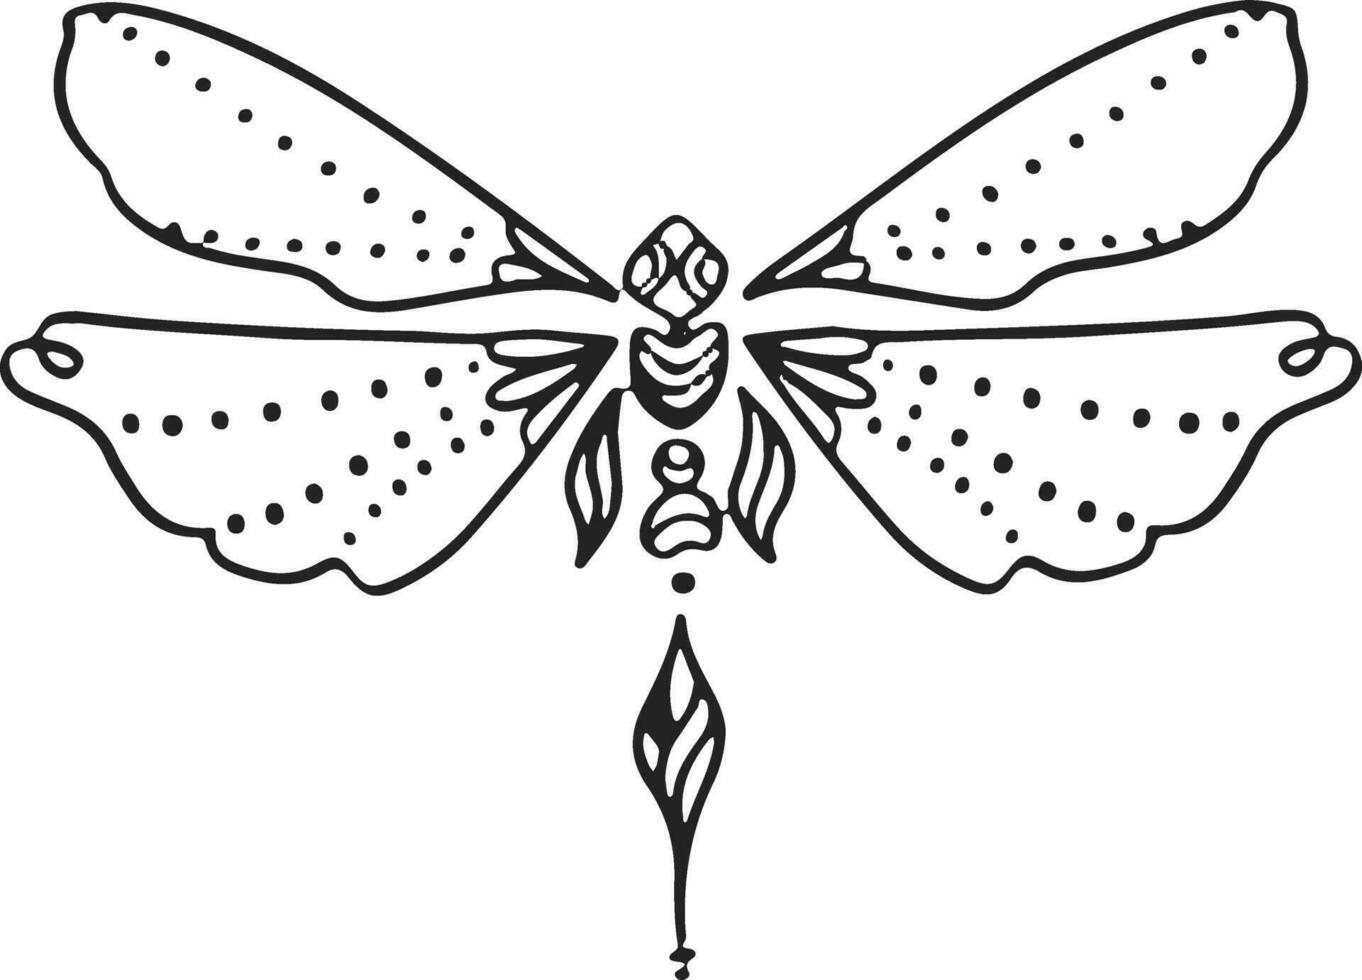 Thin linear butterfly monochrome   illustration vector